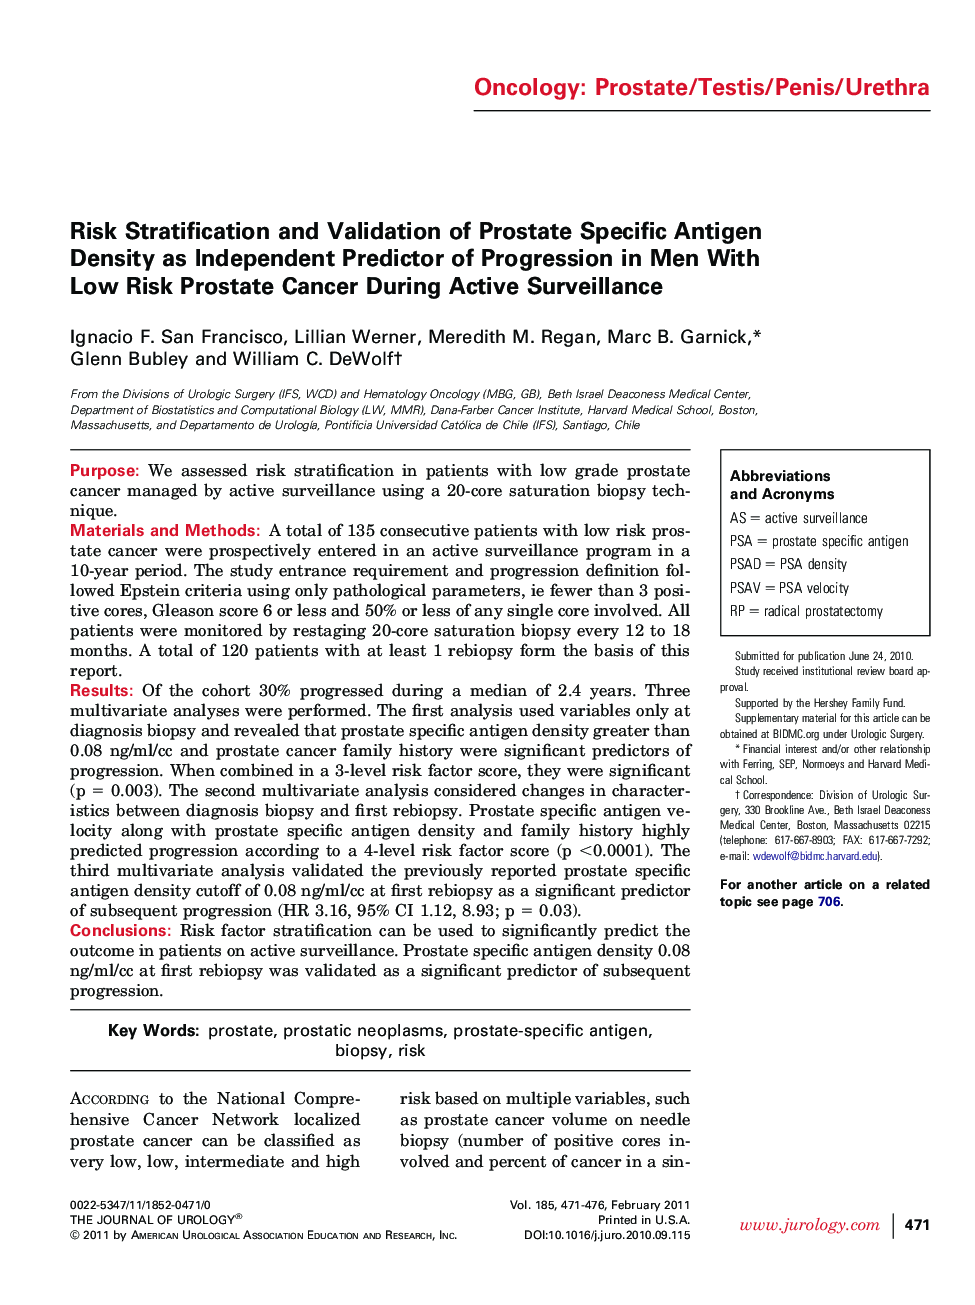 Risk Stratification and Validation of Prostate Specific Antigen Density as Independent Predictor of Progression in Men With Low Risk Prostate Cancer During Active Surveillance 